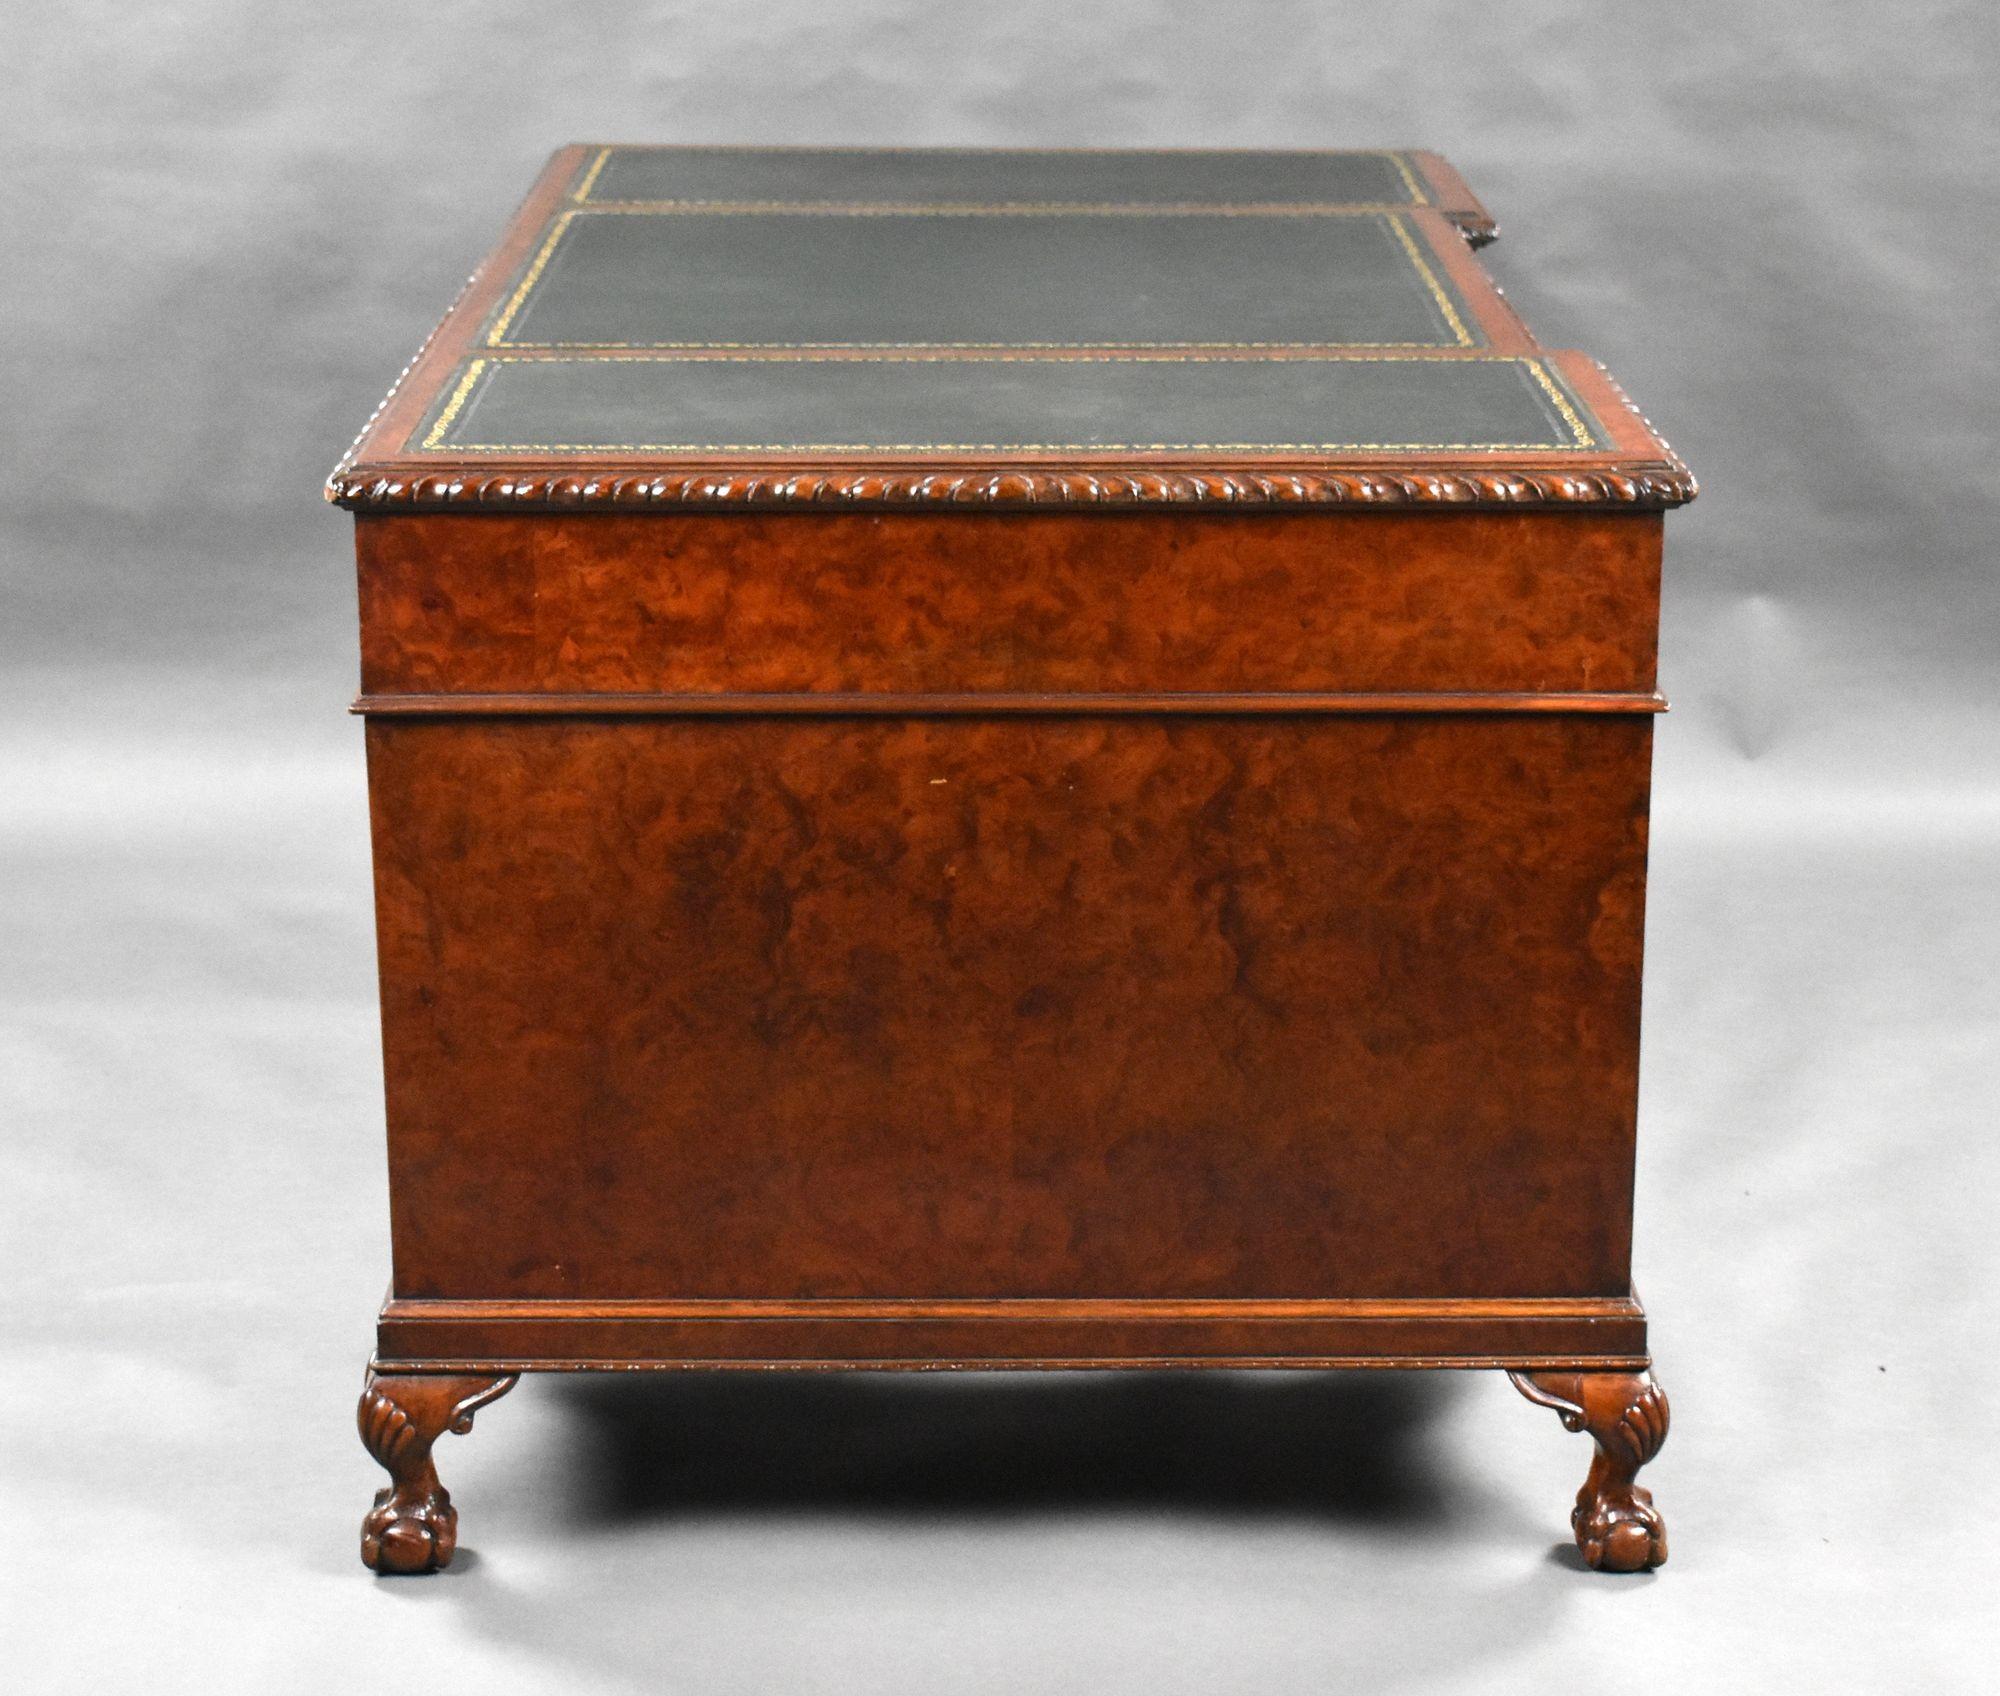 For sale is a good quality antique burr walnut pedestal desk, the top having three leather skiver inserts, each decorated with gold tooling, with three drawers below. The top fits on to two pedestals, each with a further three drawers. The desk is